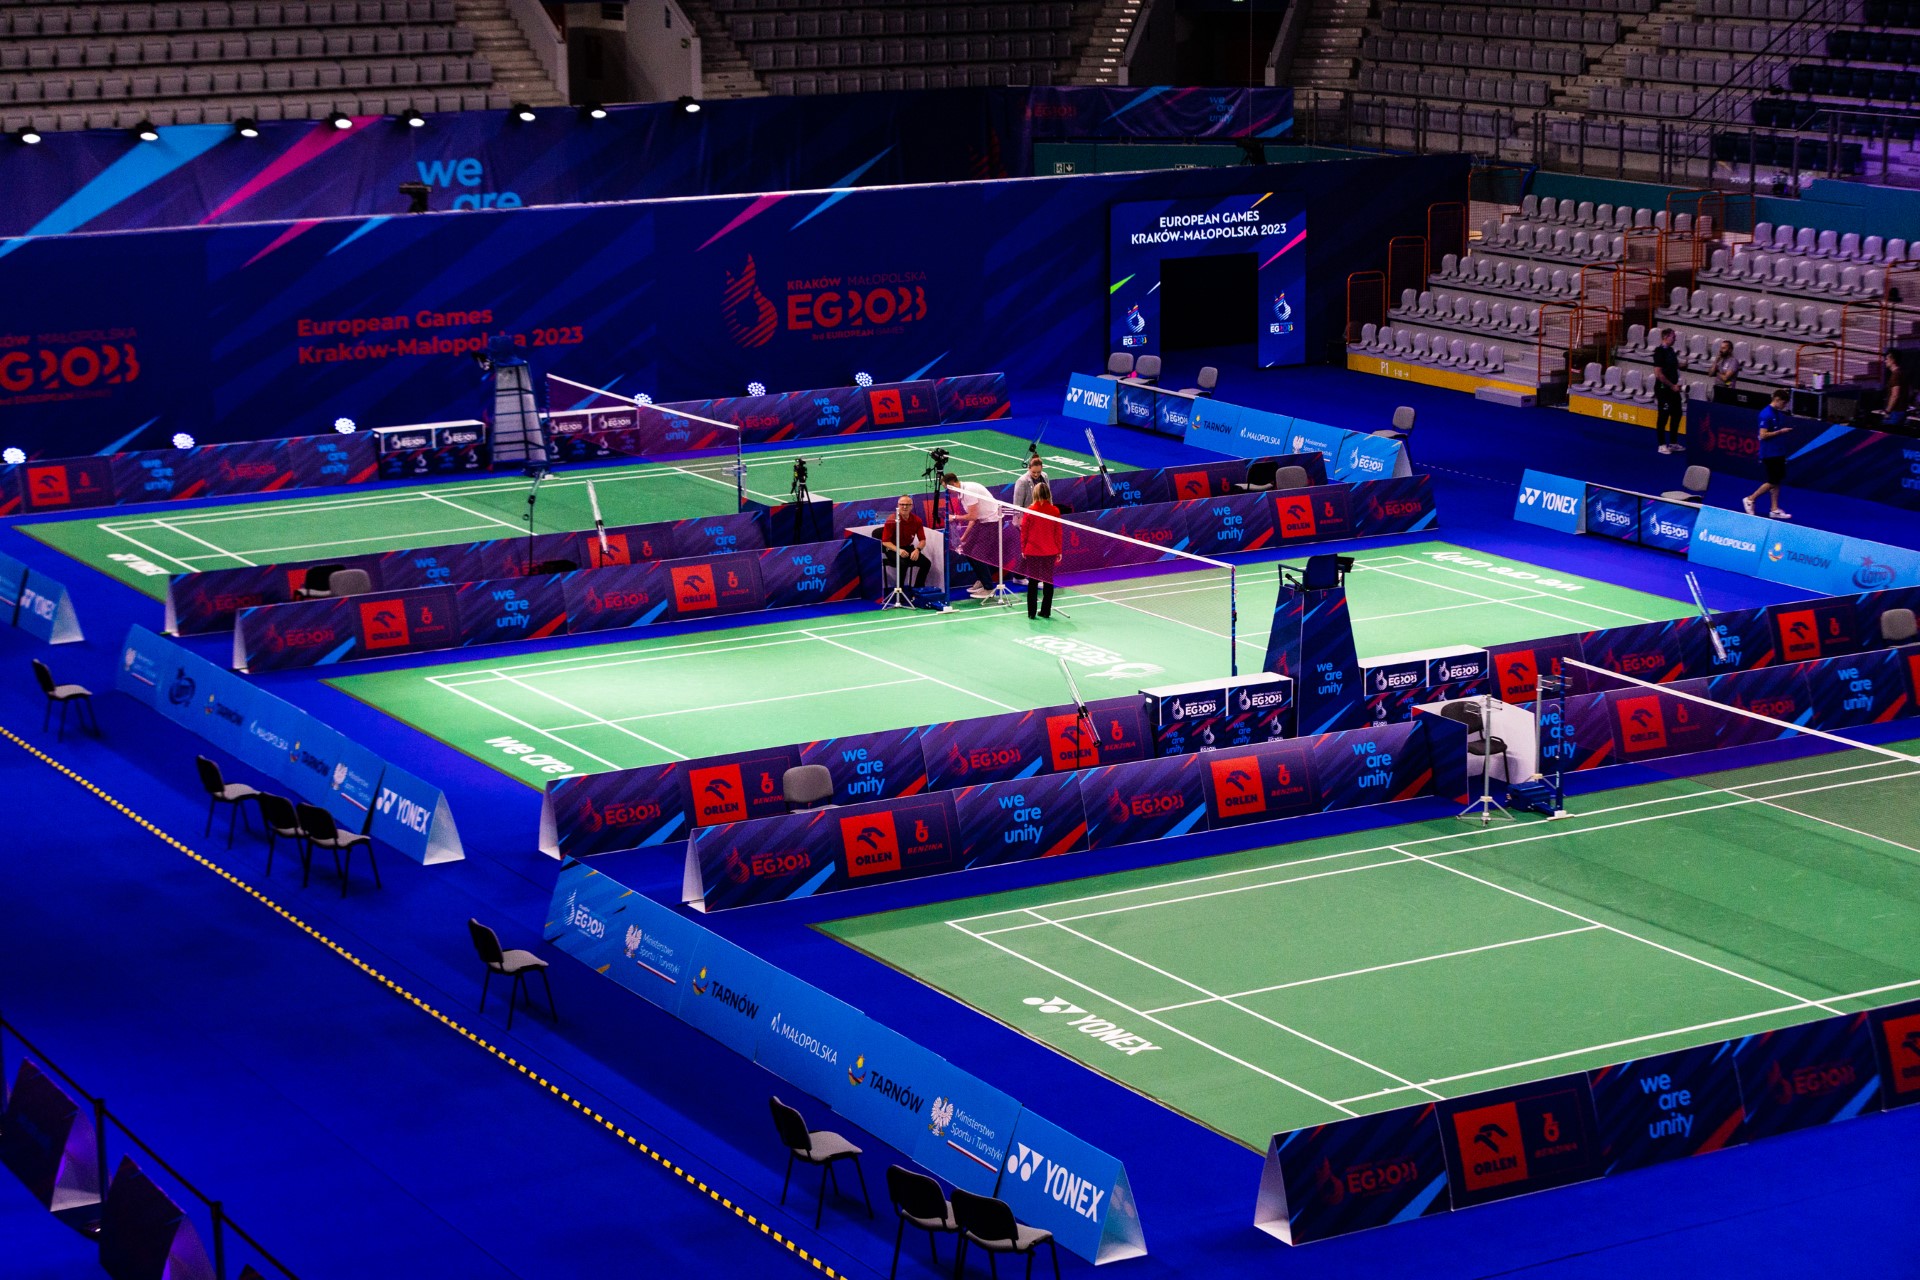 Badminton at the European Games, off with a bang